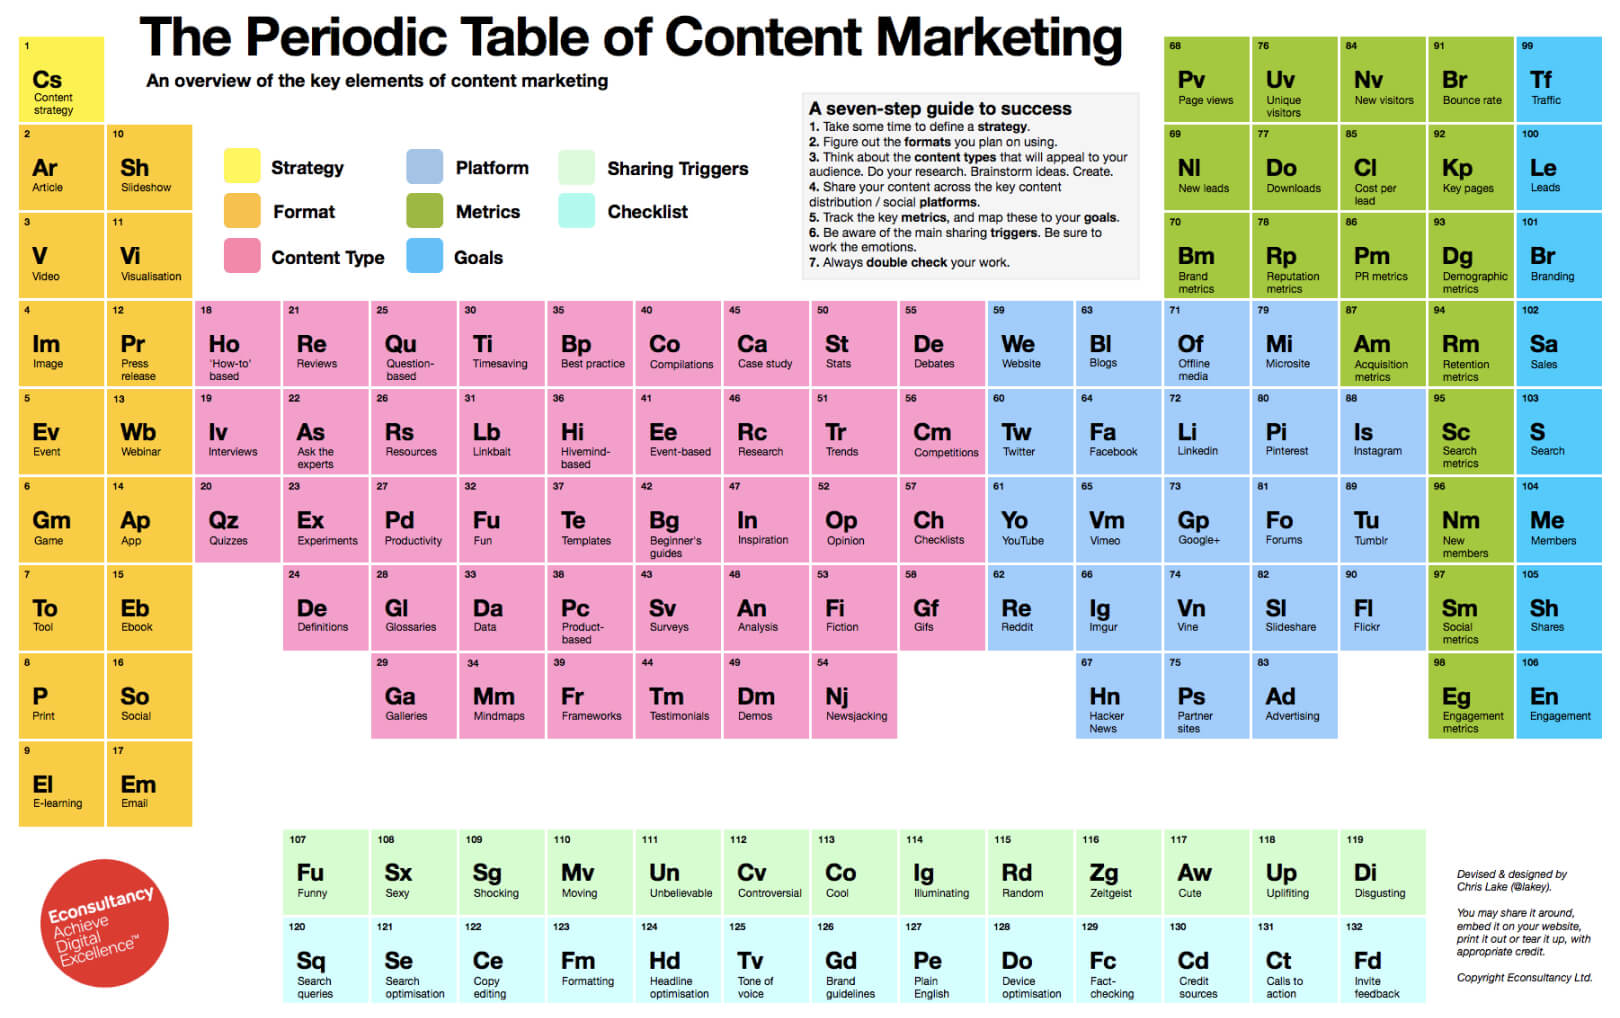 The periodic table of content marketing